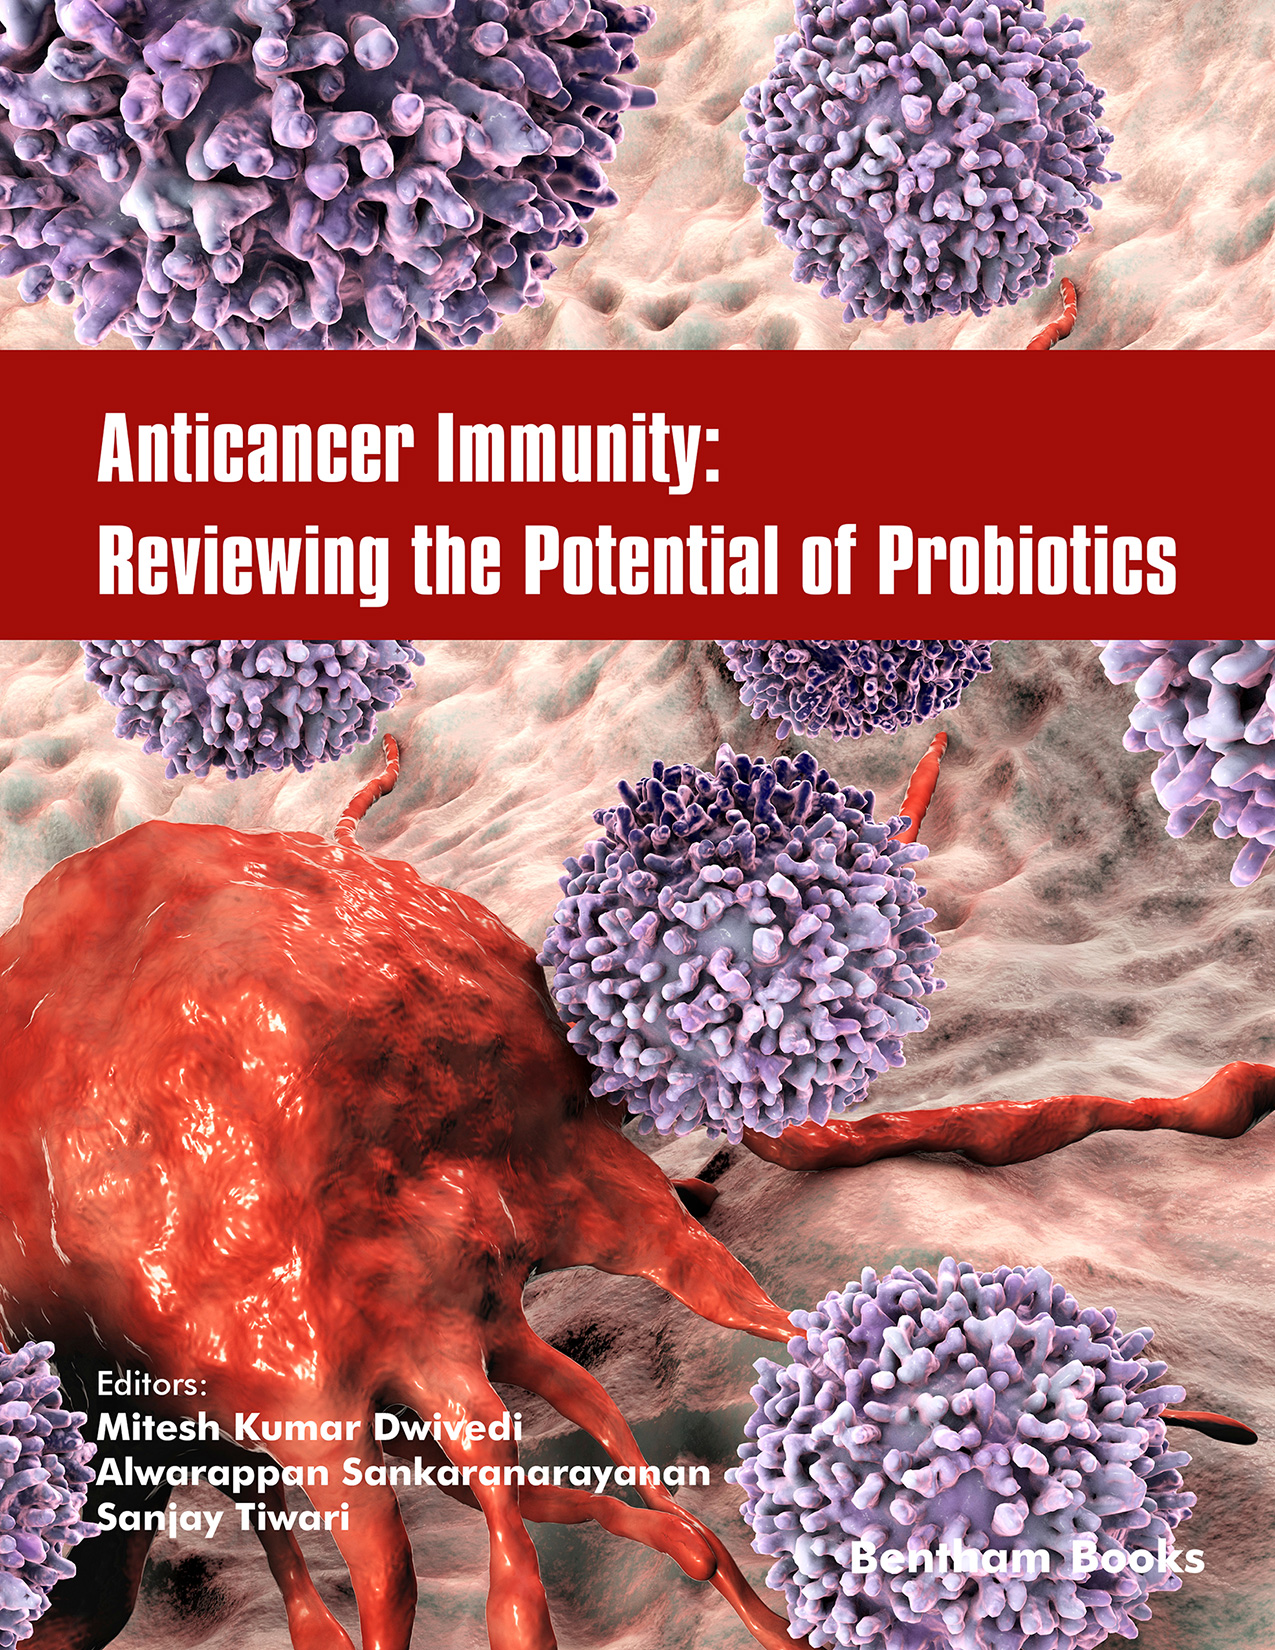 Anticancer Immunity: Reviewing the Potential of Probiotics